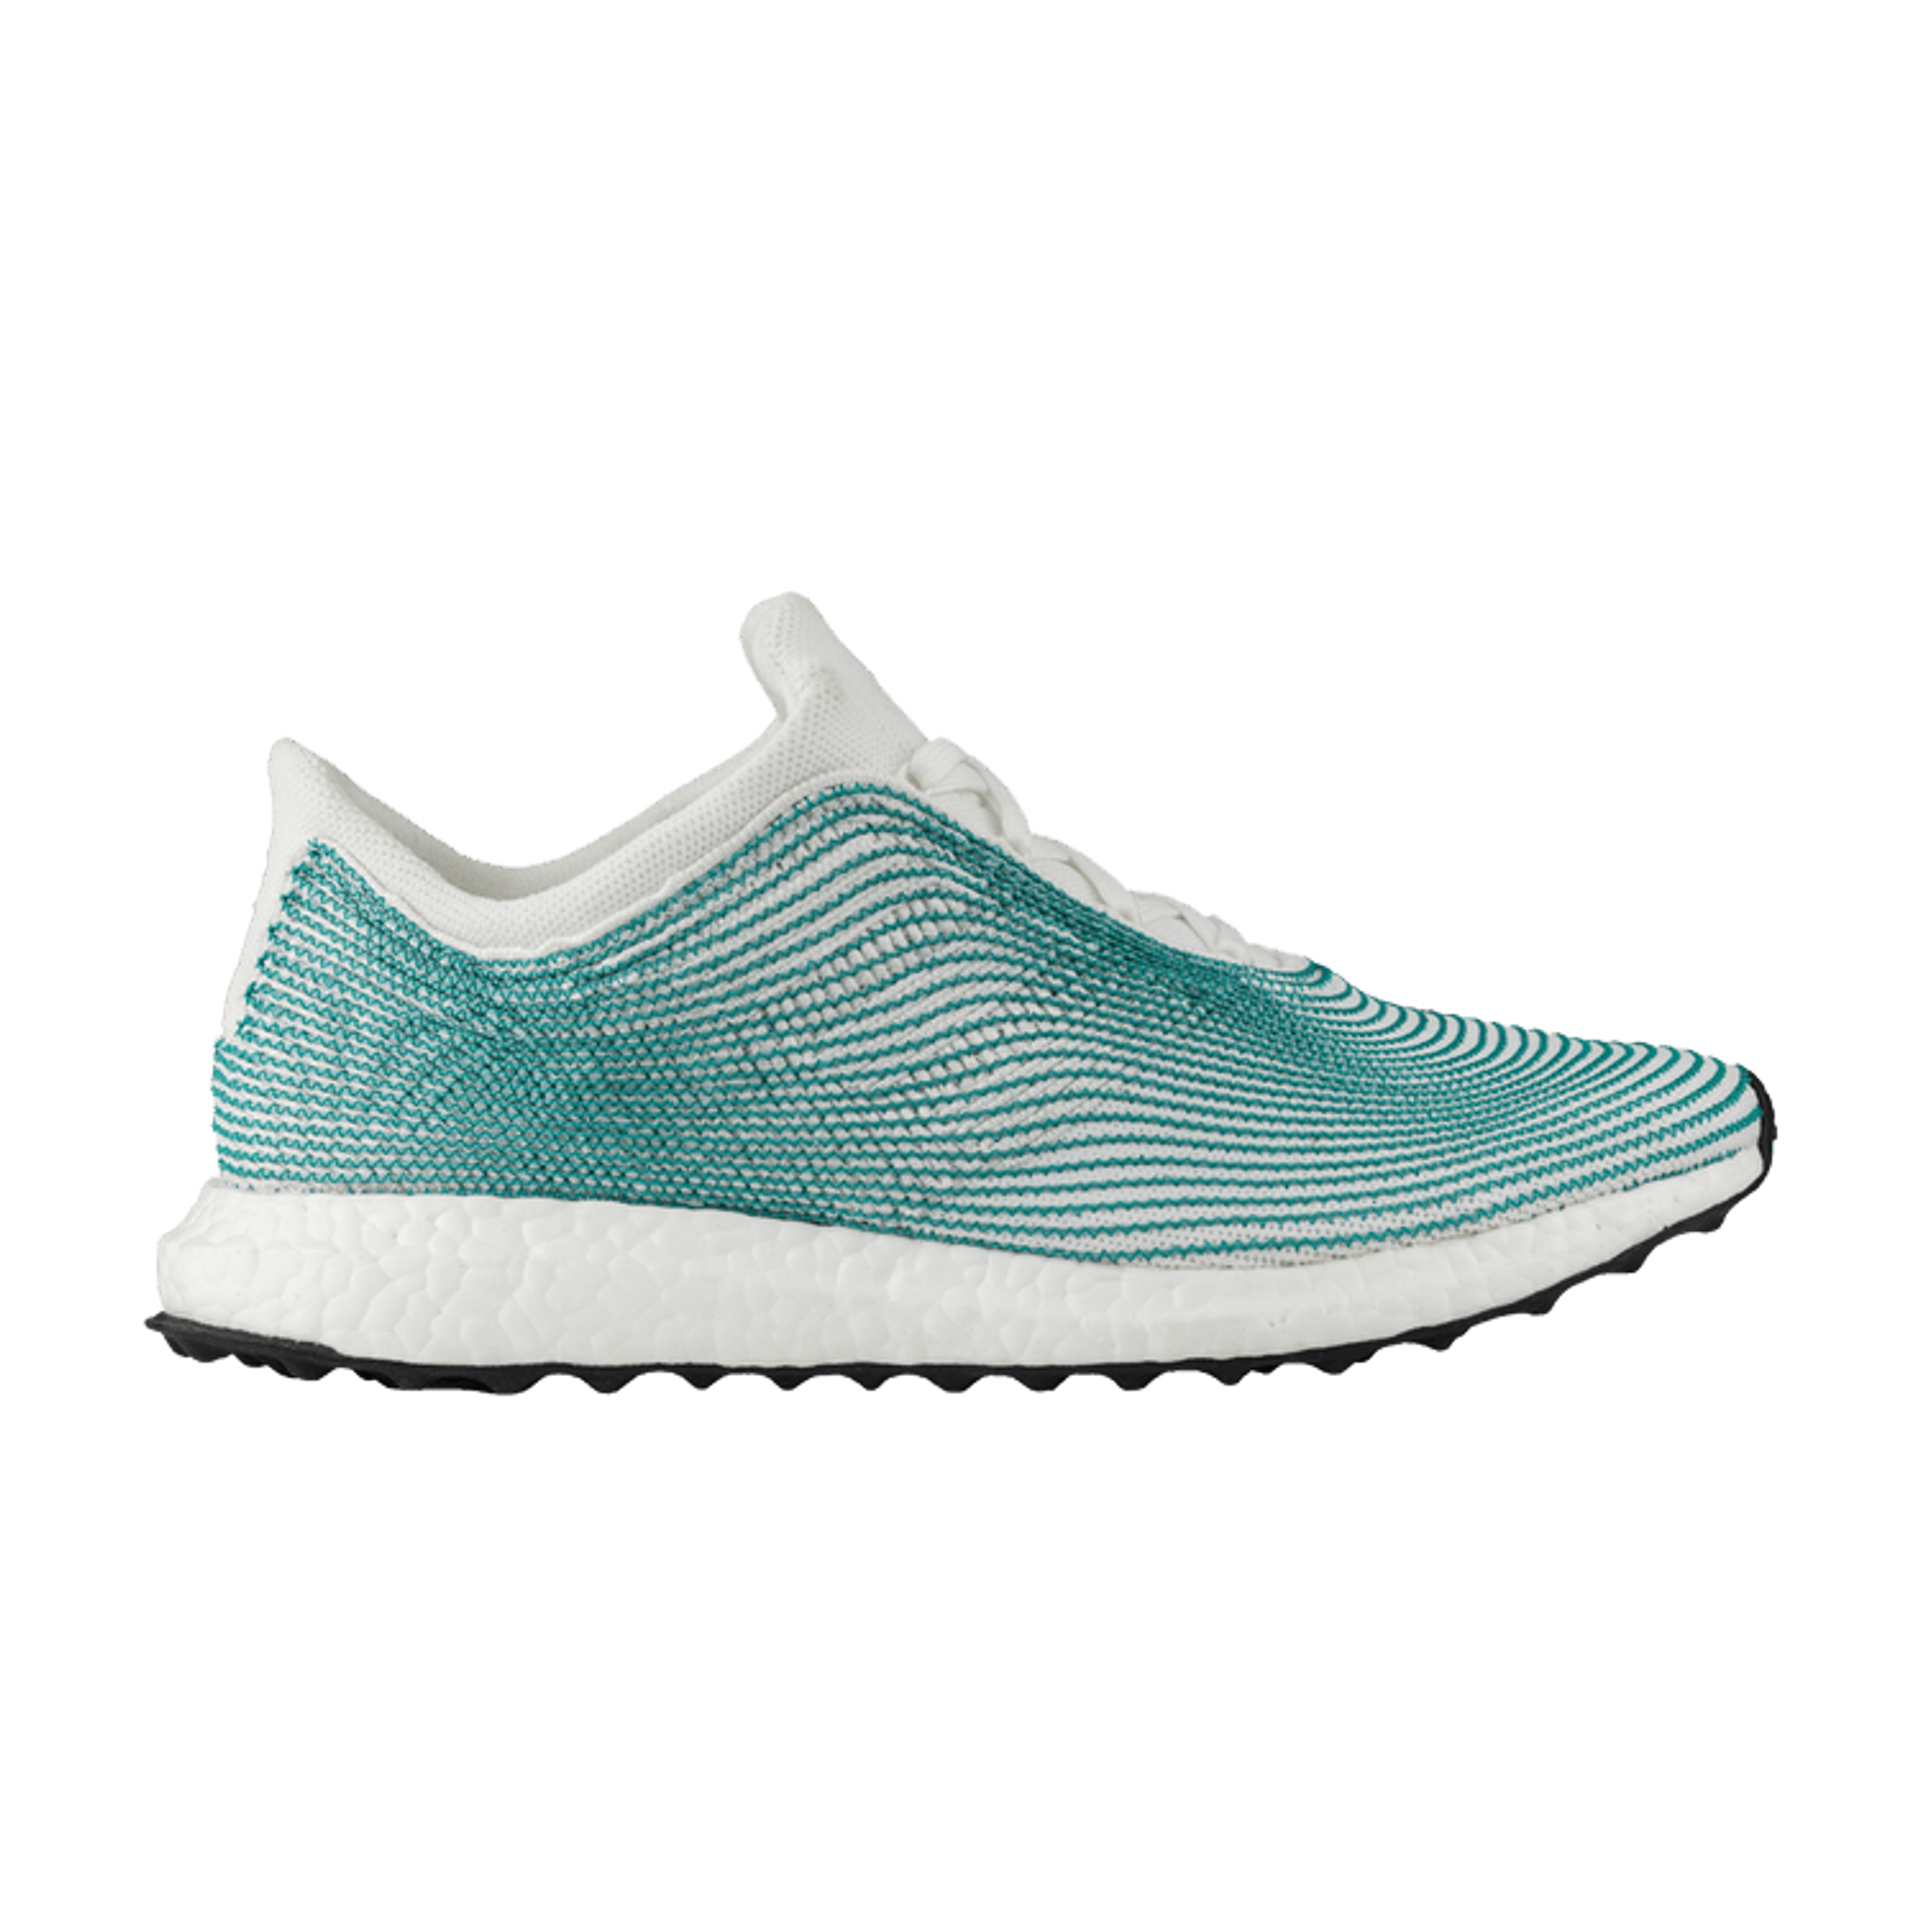 Parley x UltraBoost Uncaged 'For the Oceans'